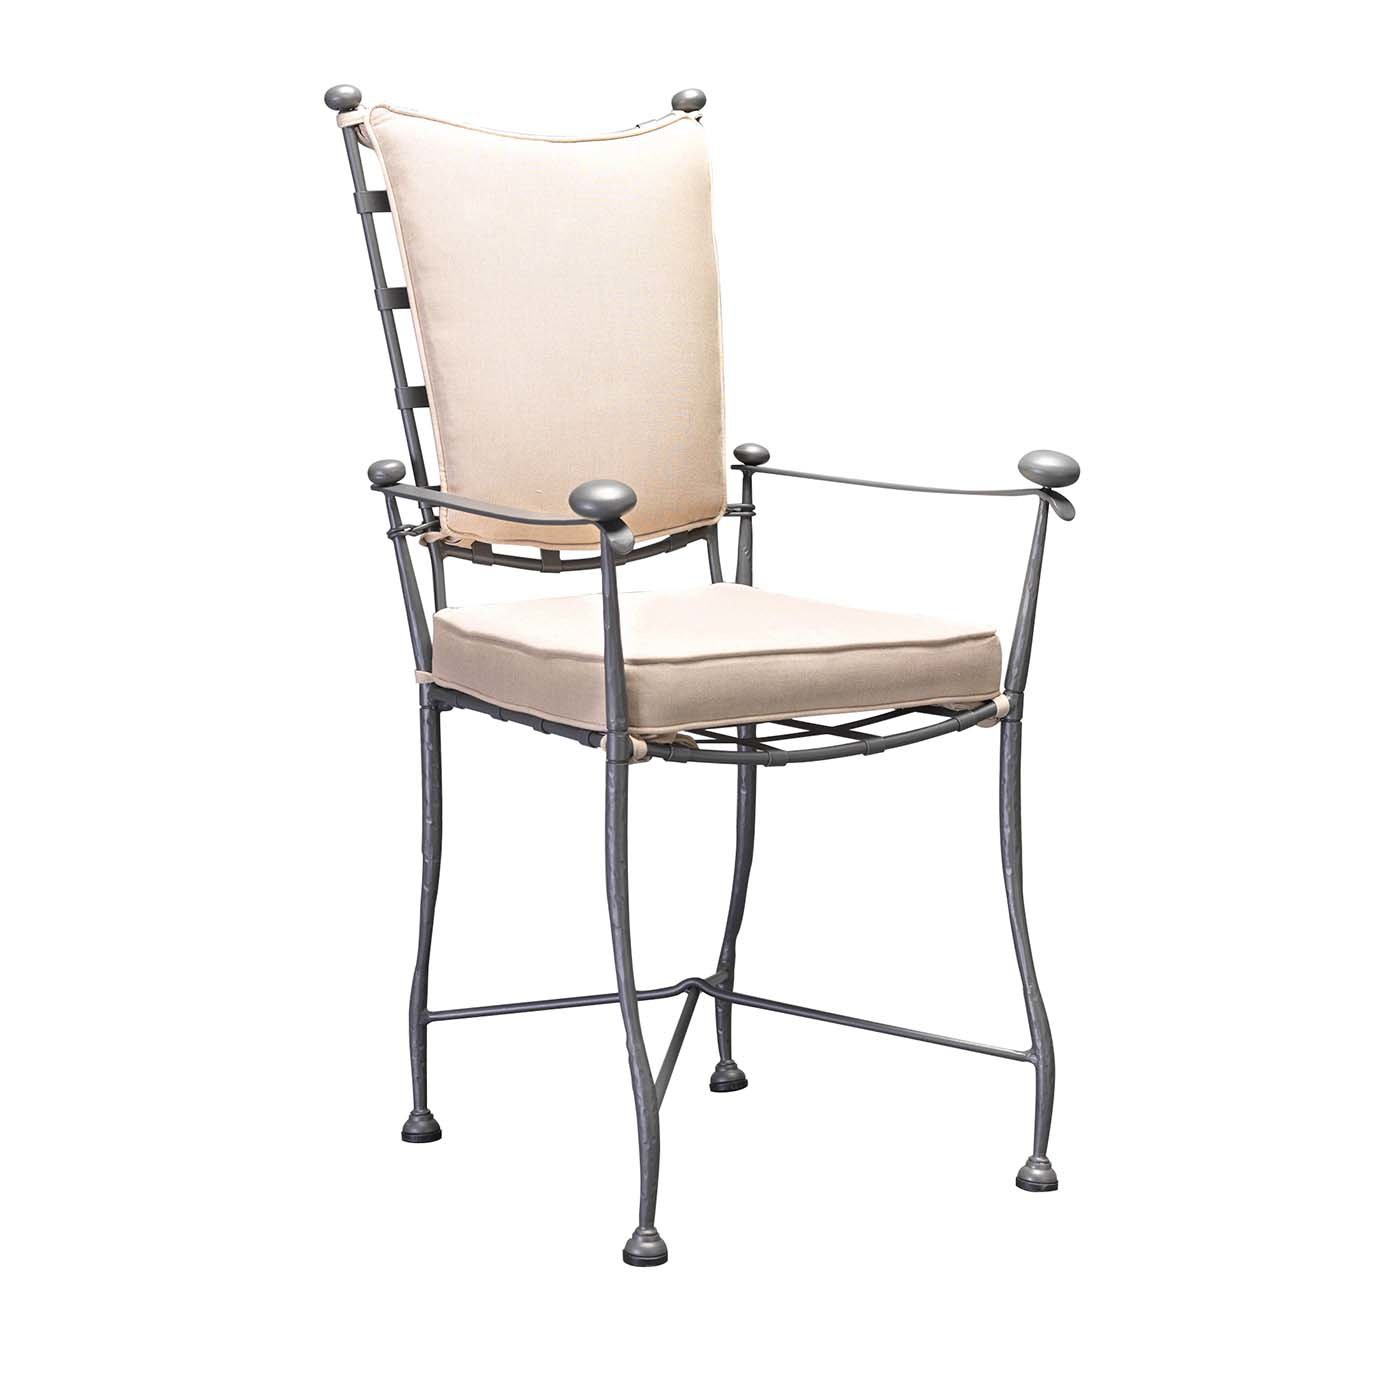 Intreccio Outdoor Chair in Stainless Steel - Main view